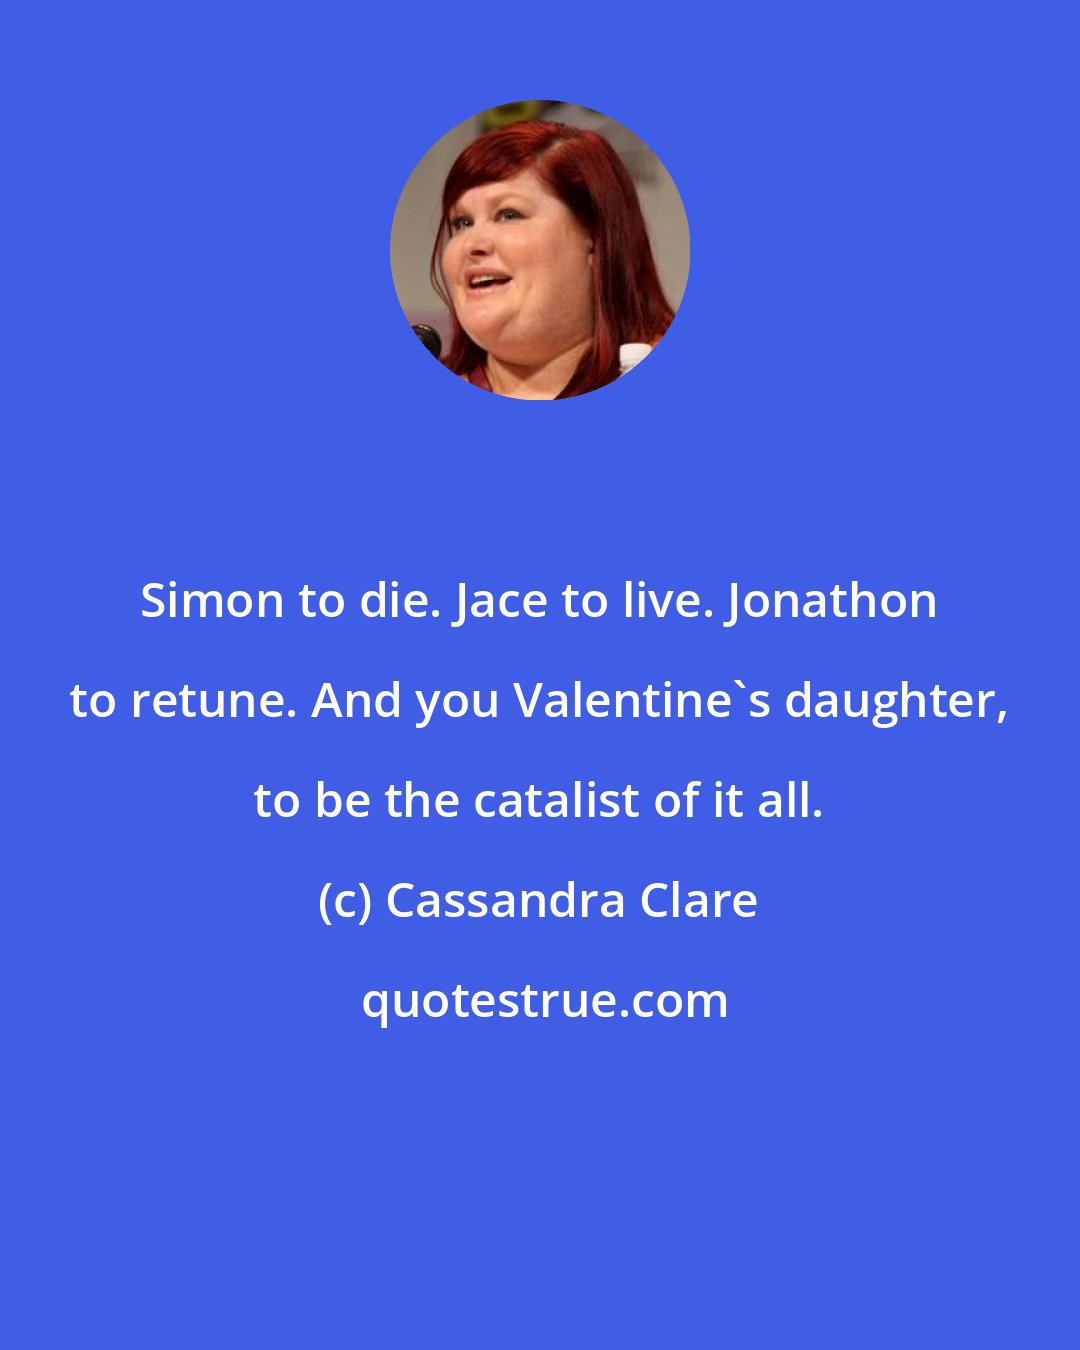 Cassandra Clare: Simon to die. Jace to live. Jonathon to retune. And you Valentine's daughter, to be the catalist of it all.